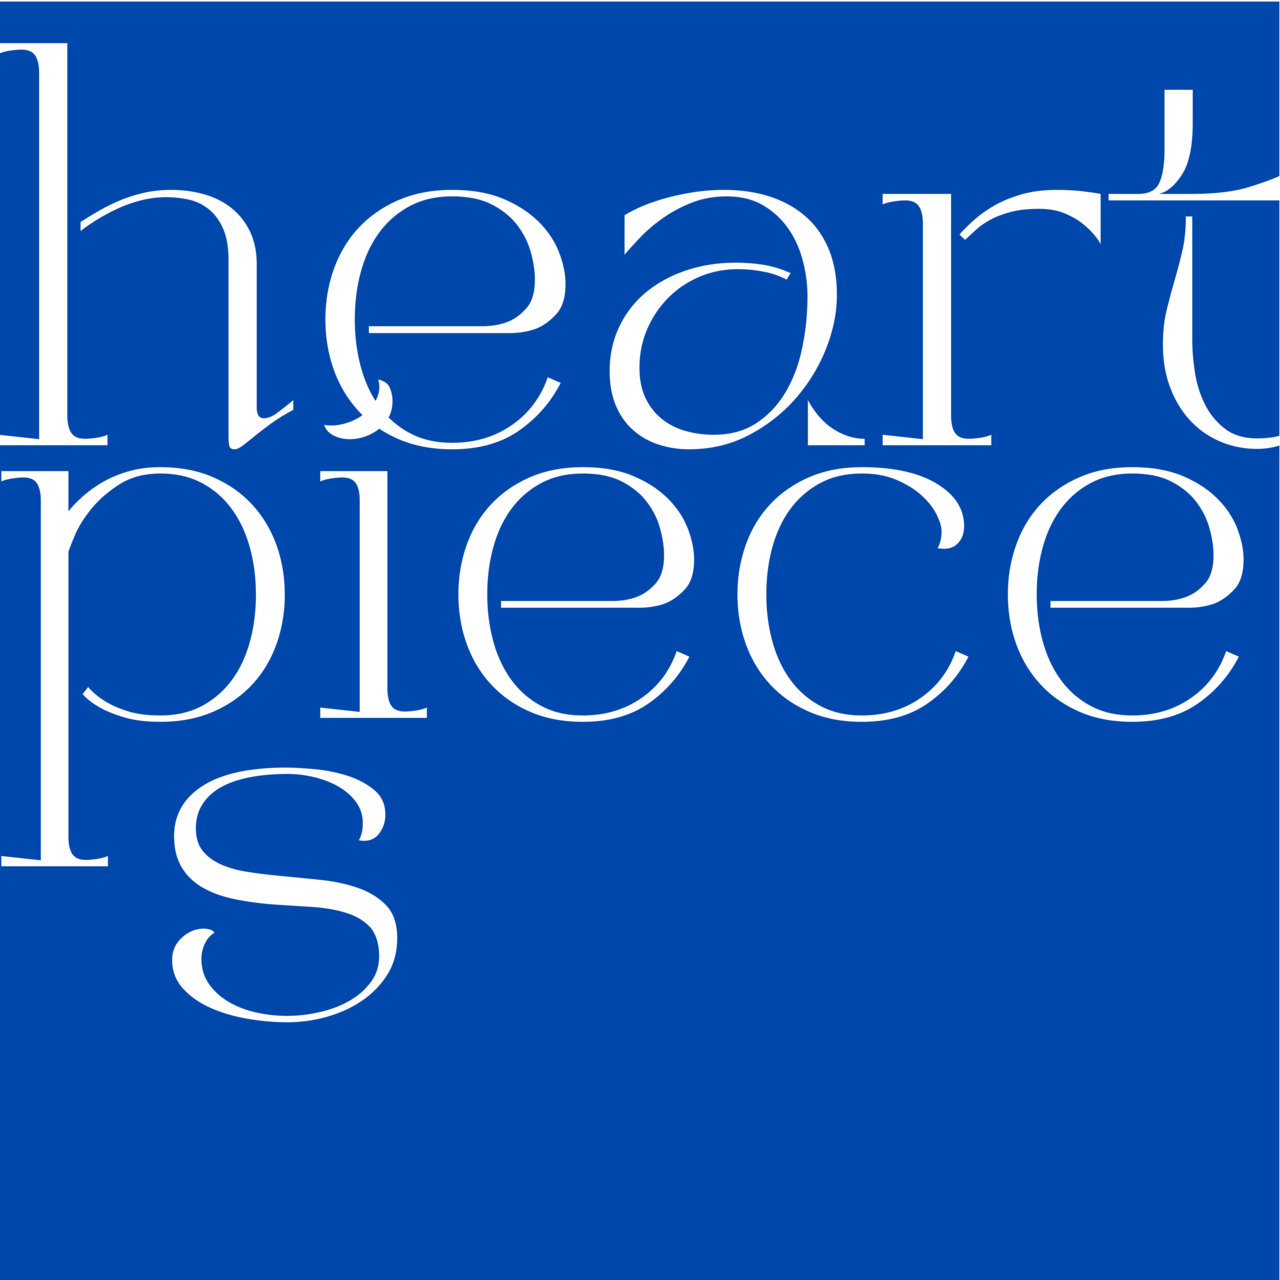 Artwork for heart pieces